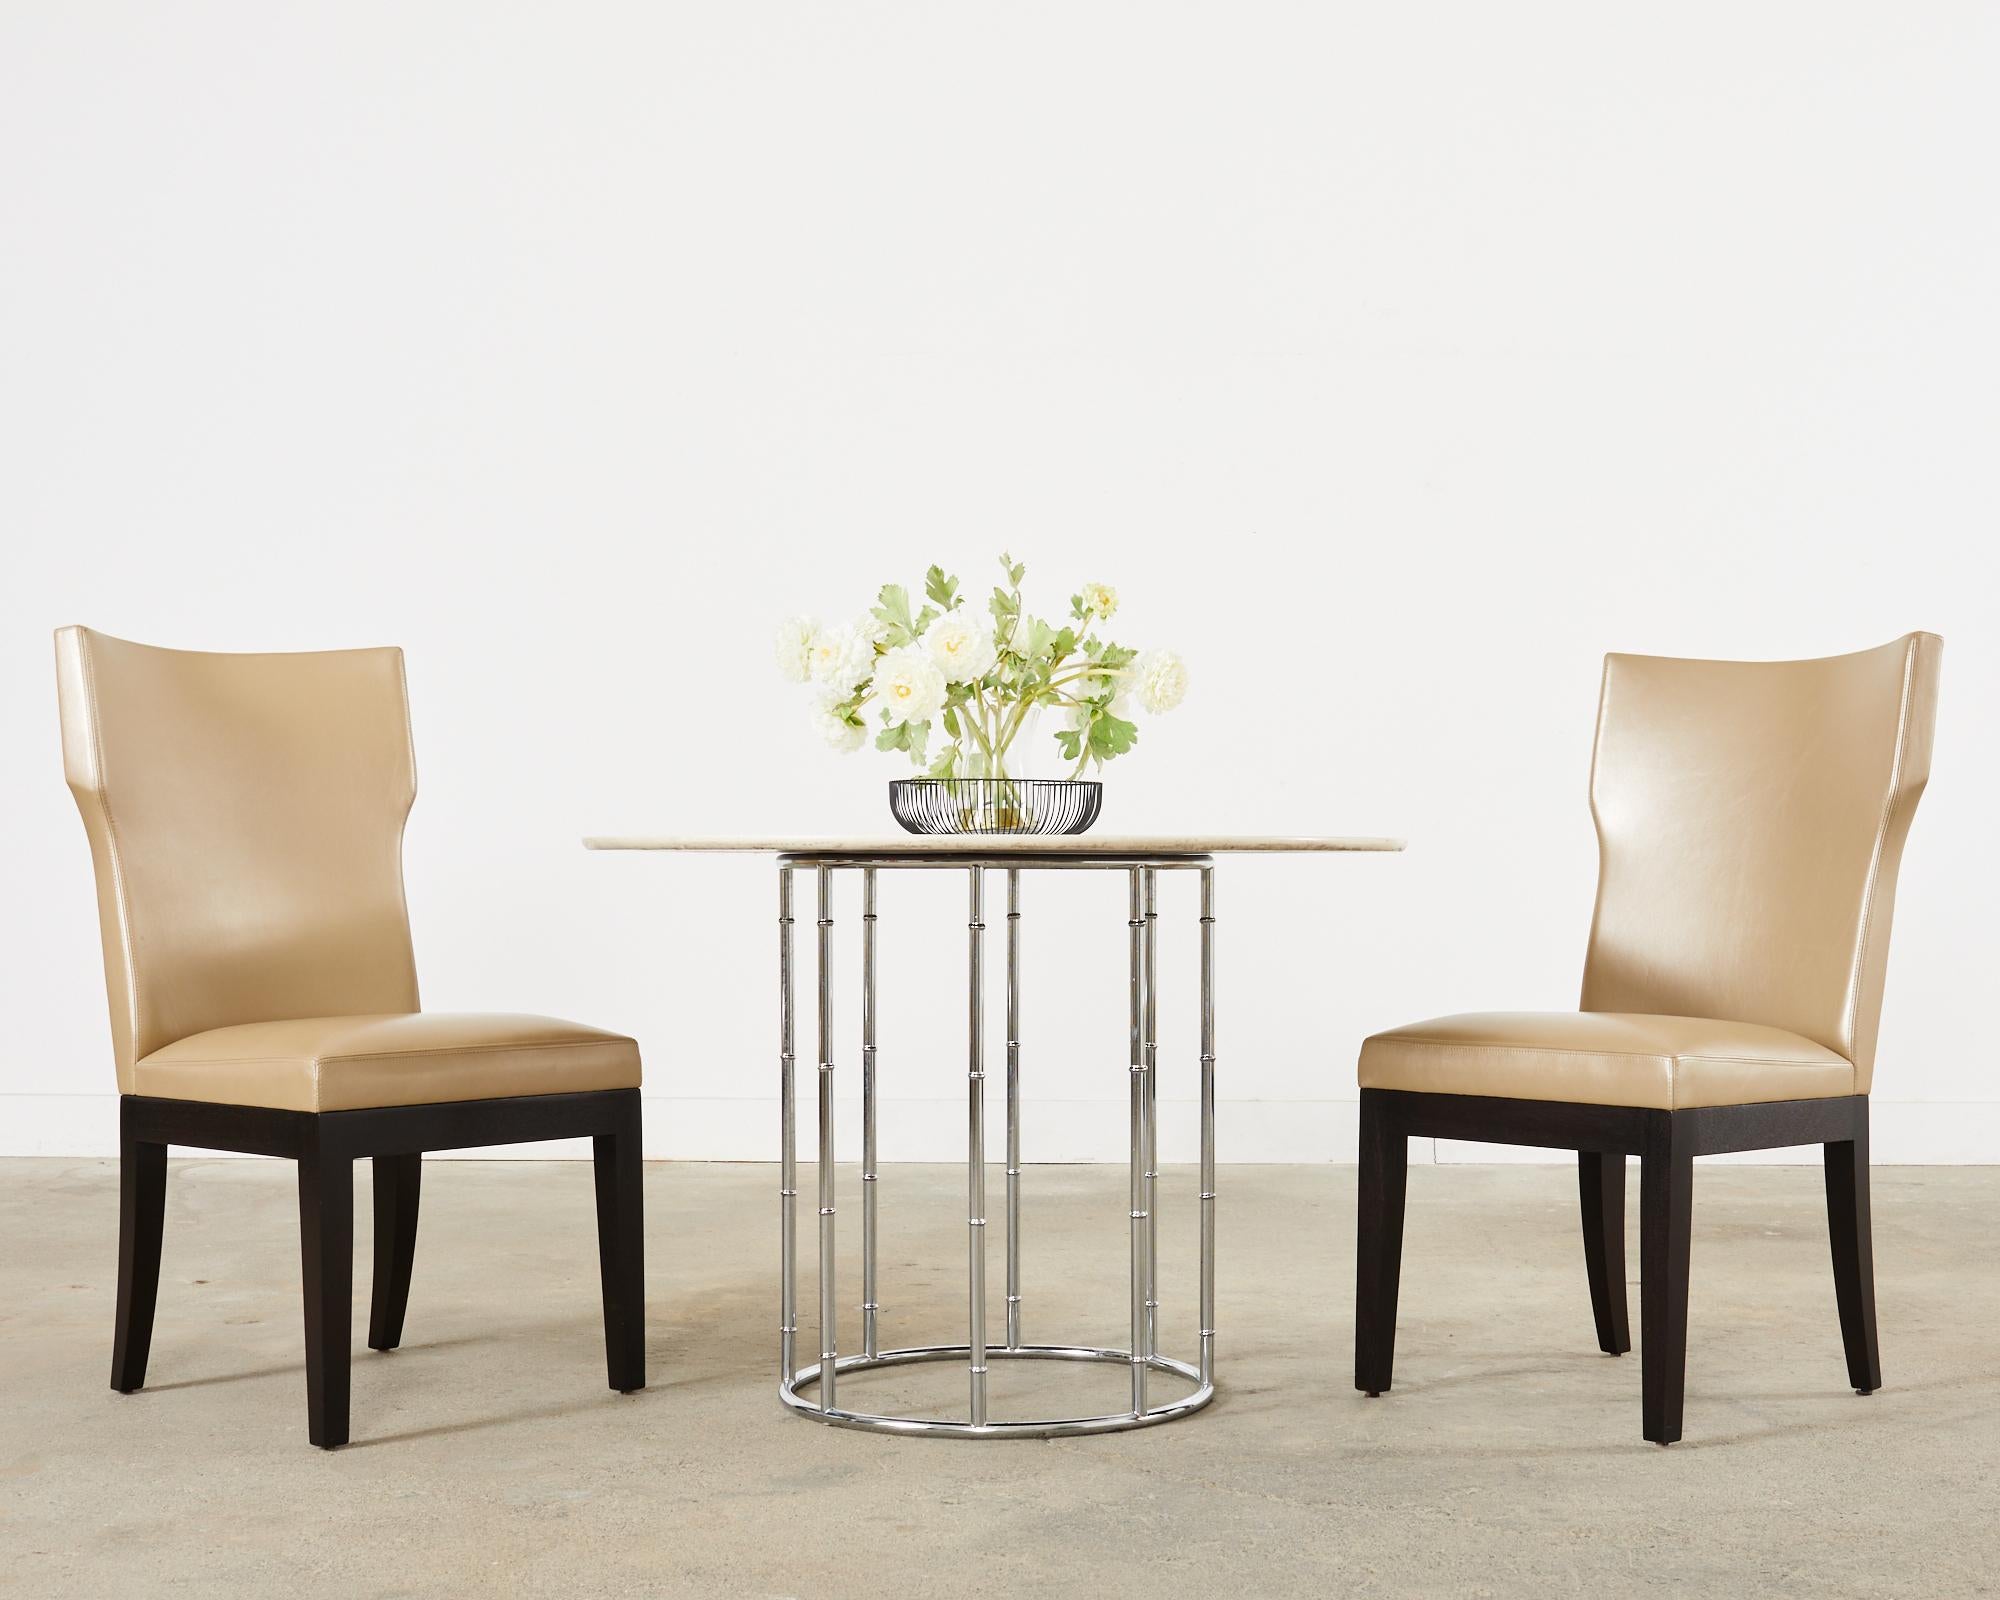 Sublime set of eight leather dining chairs designed by Christian Liaigre for Holly Hunt. The Barbuda chairs feature a distinctive frame with a curved back and subtle wings. The frames are black lacquer ebonized and finished in a metallic style